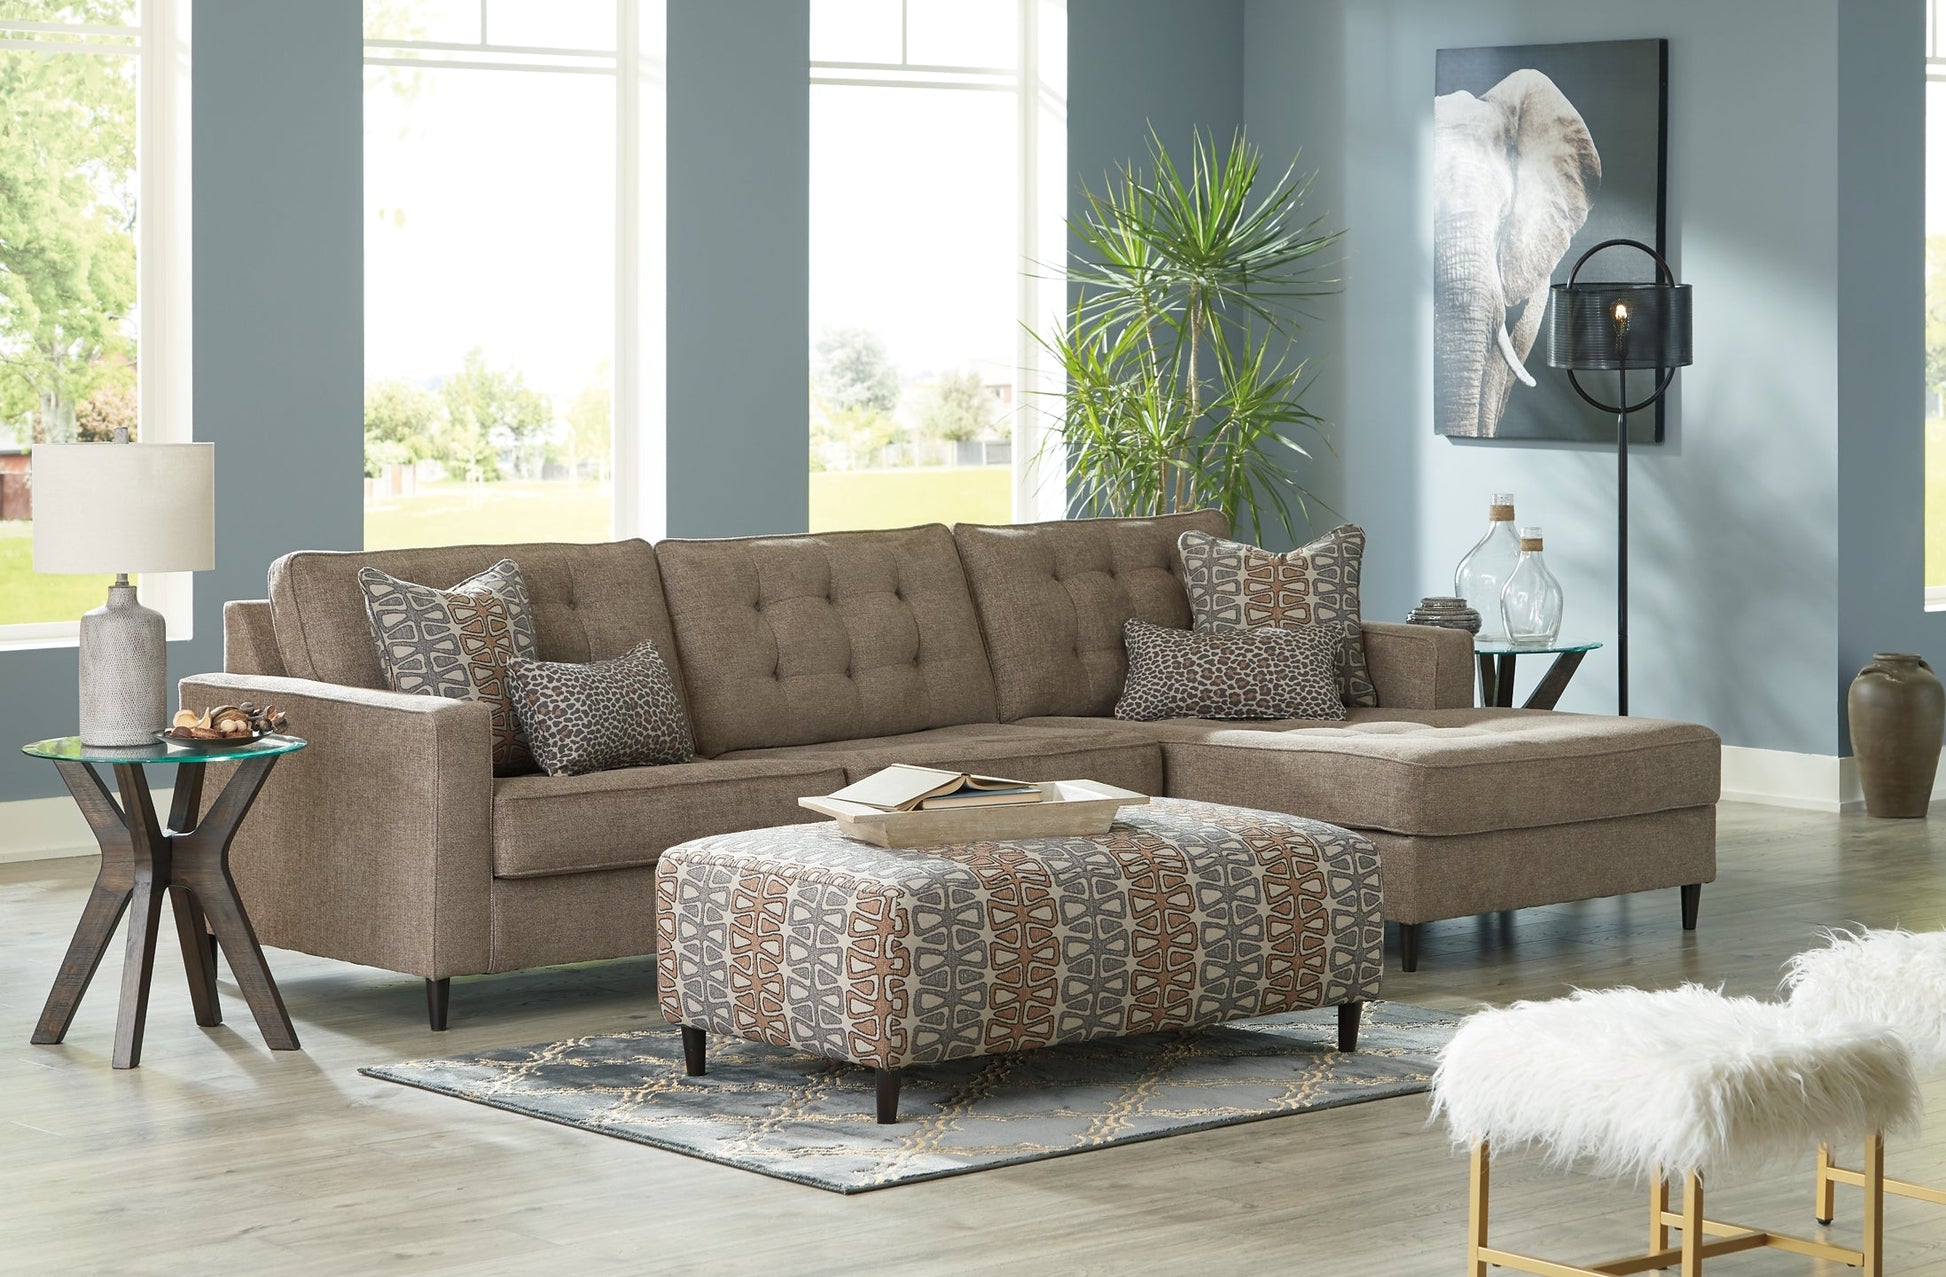 Flintshire 2-Piece Sectional with Ottoman at Walker Mattress and Furniture Locations in Cedar Park and Belton TX.